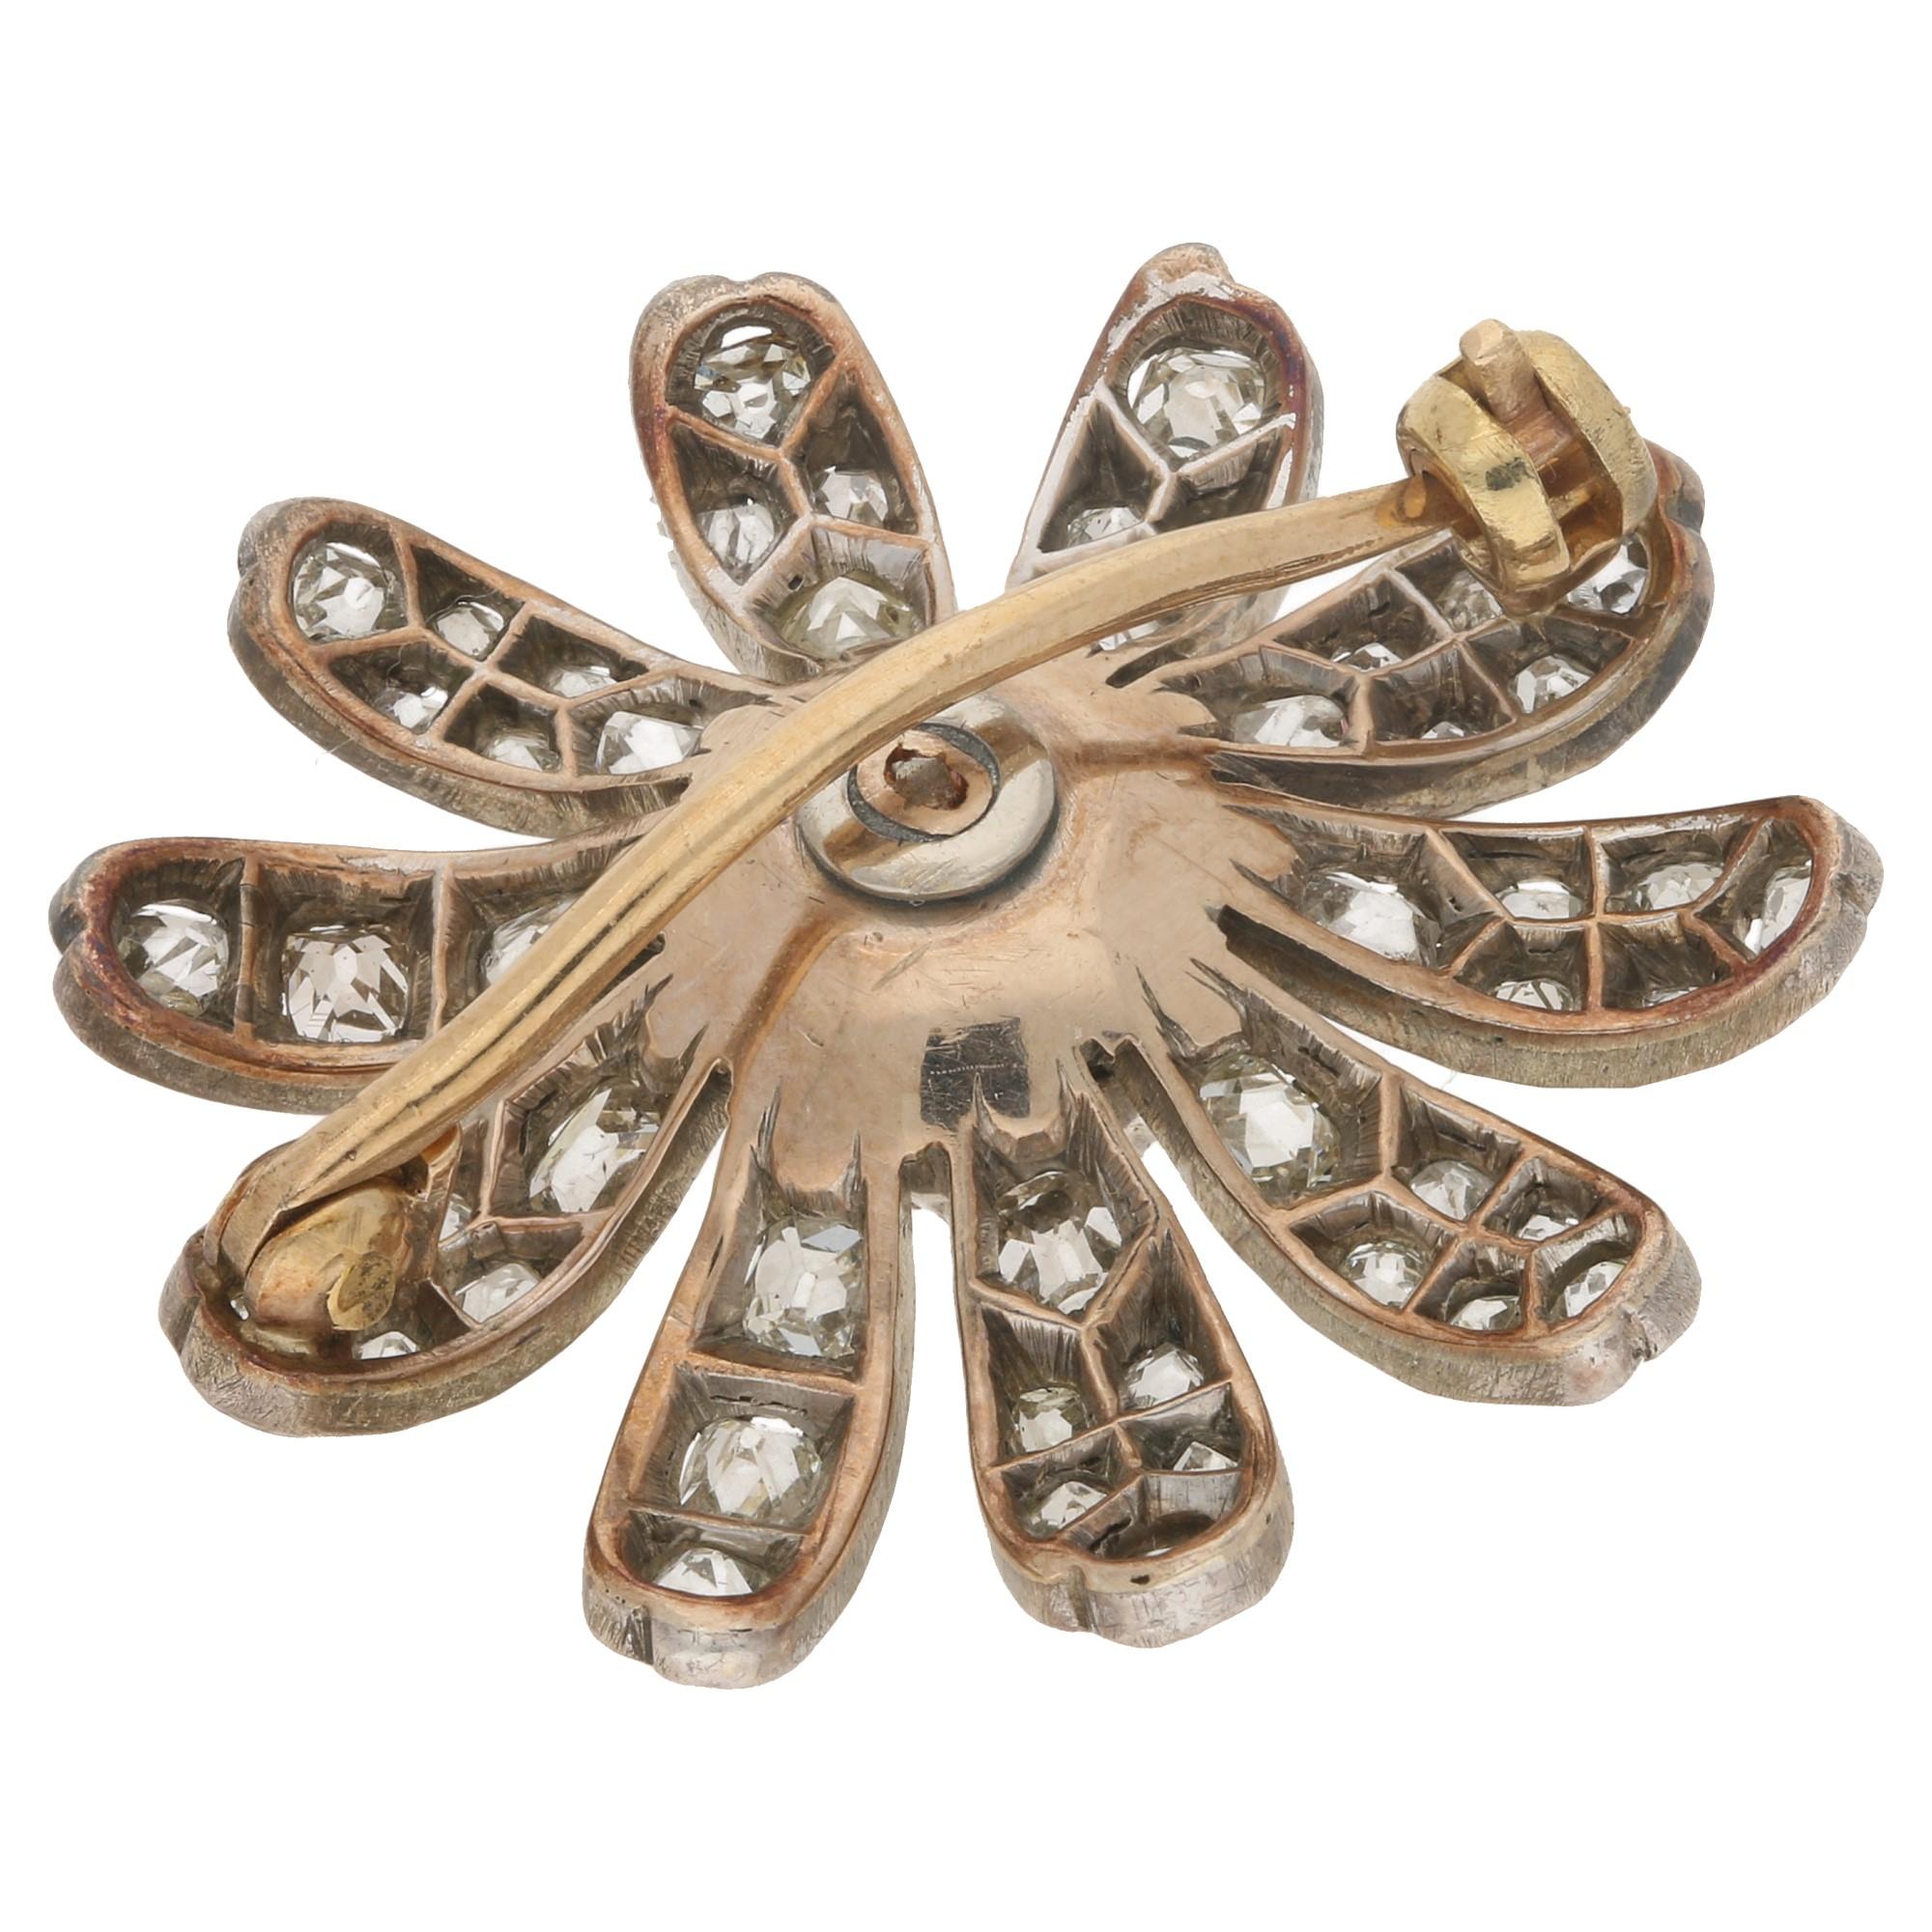 A beautiful late Victorian diamond flower brooch set in the distinctive Victorian silver on gold. 

The brooch is set with a mixture of eight cut and old mine cut diamonds within a beautifully intricate floral motif. It is secured to reverse with a